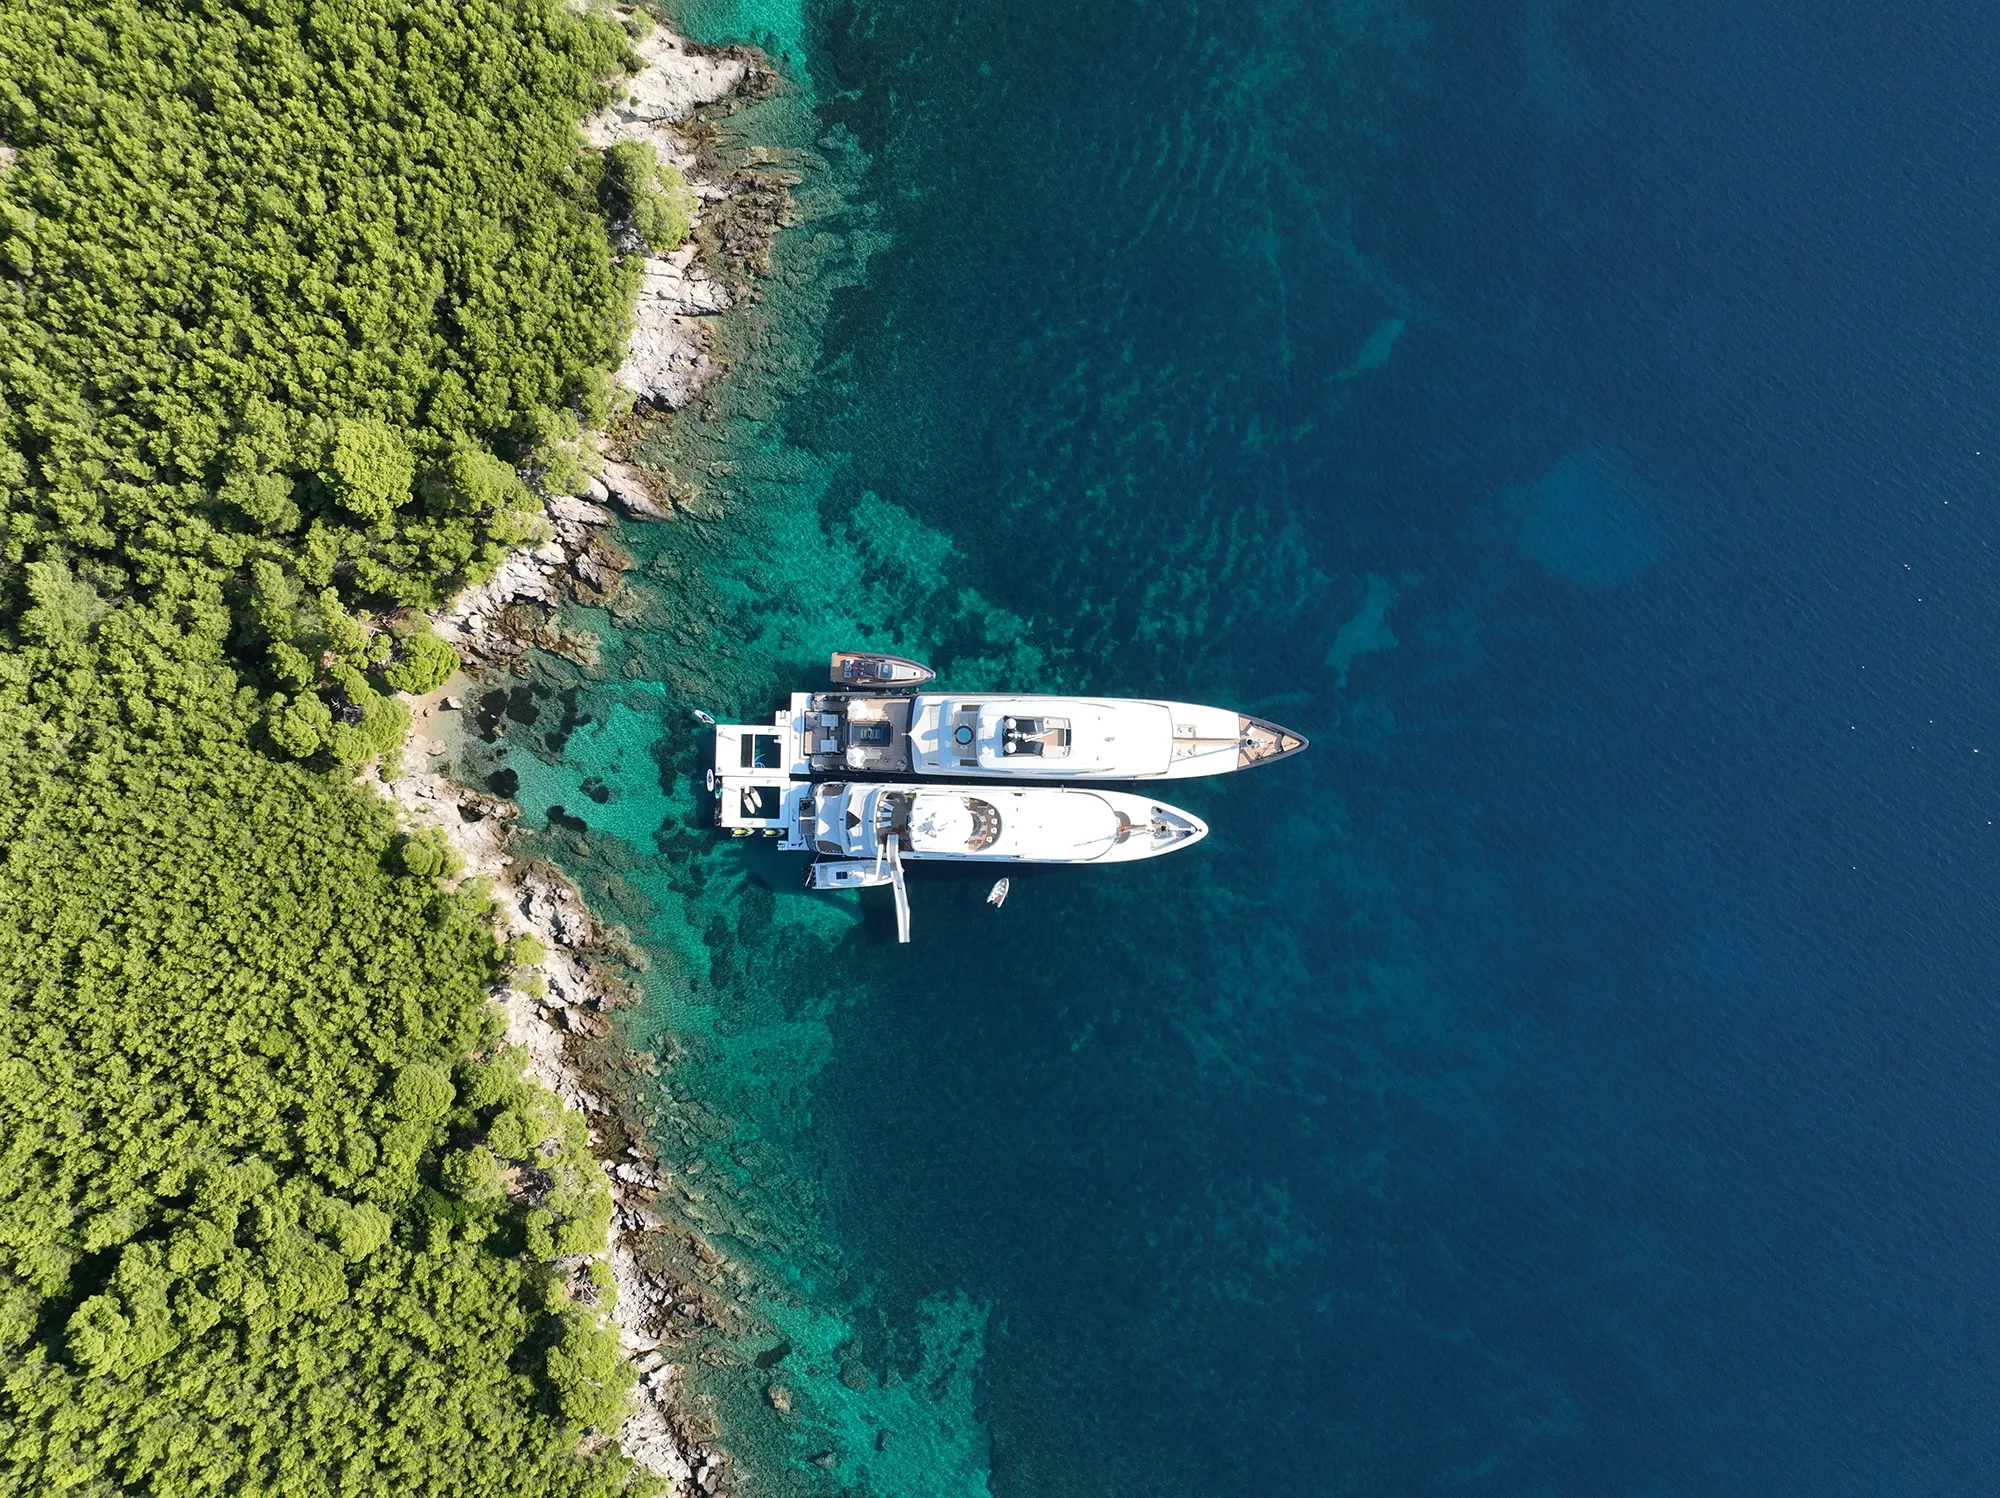 Sea Pool Yacht Slide Loungers MY Loon 221 and Loon 180 in tandem in Croatia drone view of anchorage